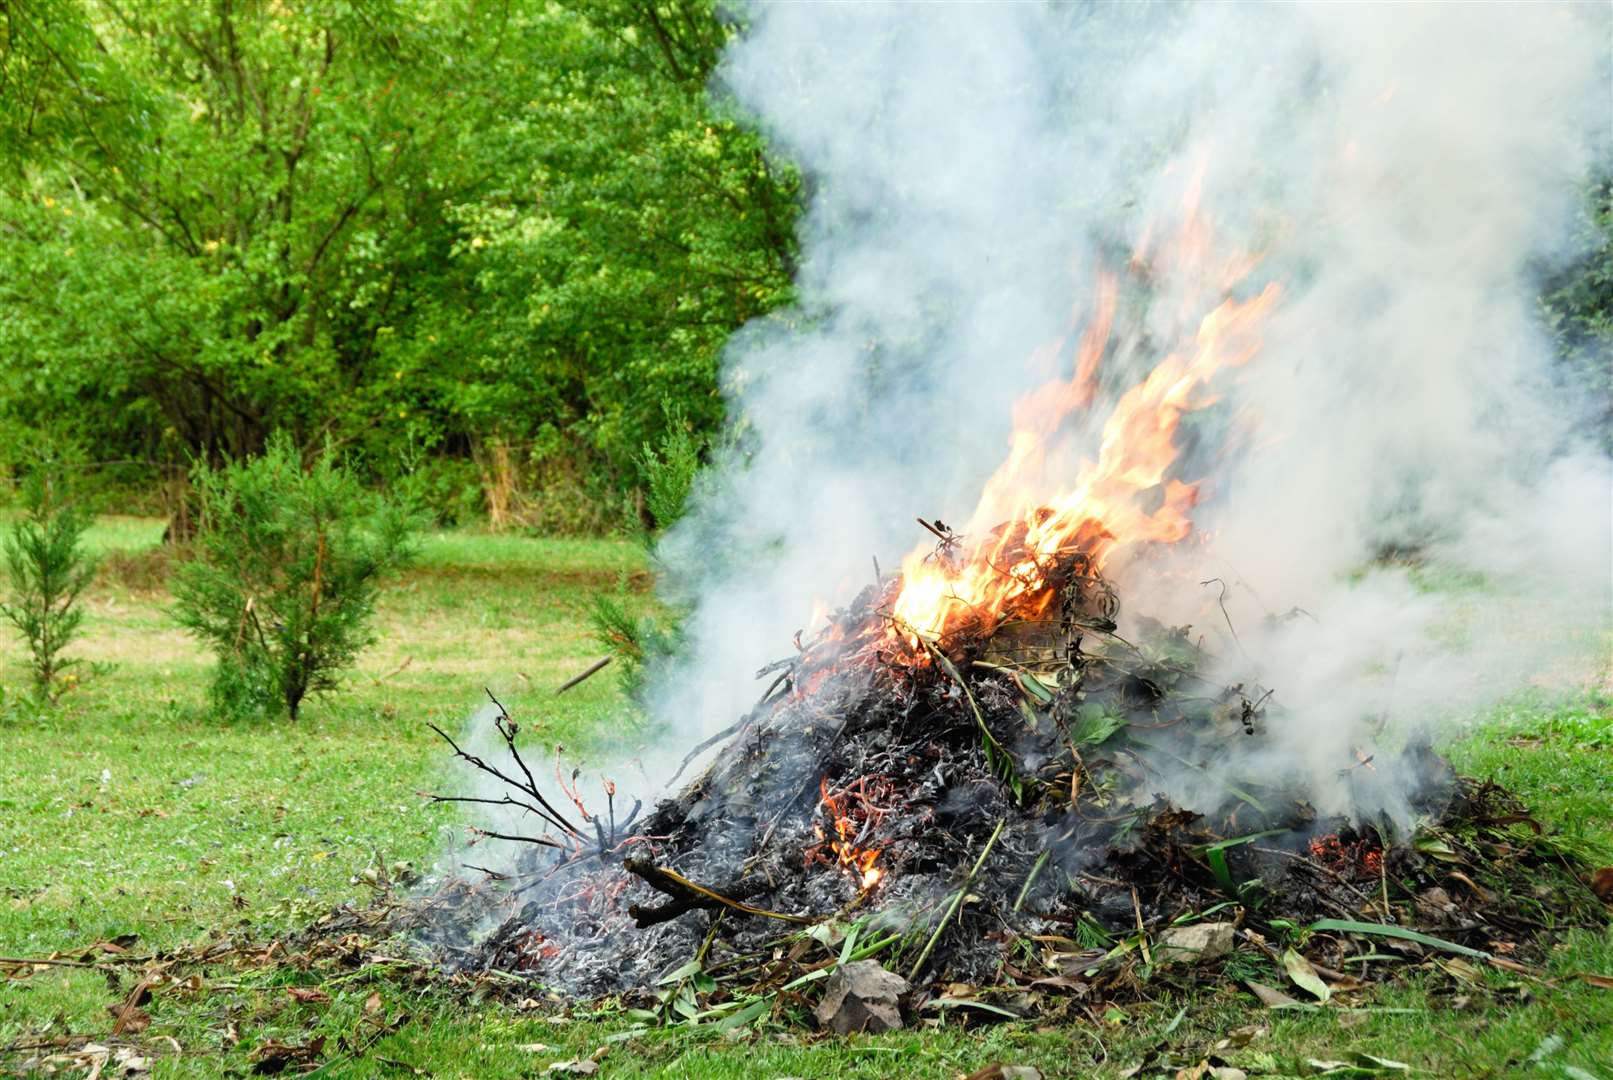 Secret Thinker has created a stink by burning rubbish in his garden. Picture: iStock